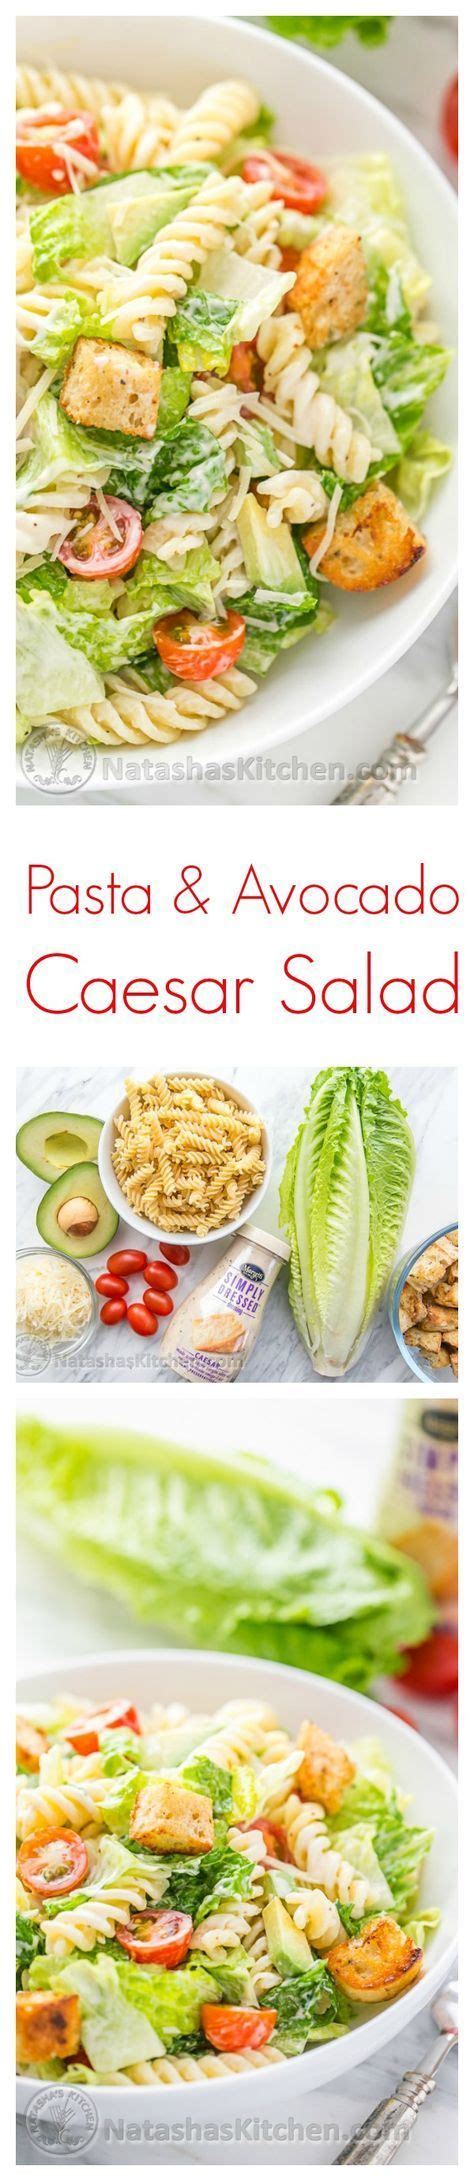 Red onion and celery add some crunch, while lemon juice gives it some zing. You have to try this Pasta Avocado Caesar Salad. Easy and ...